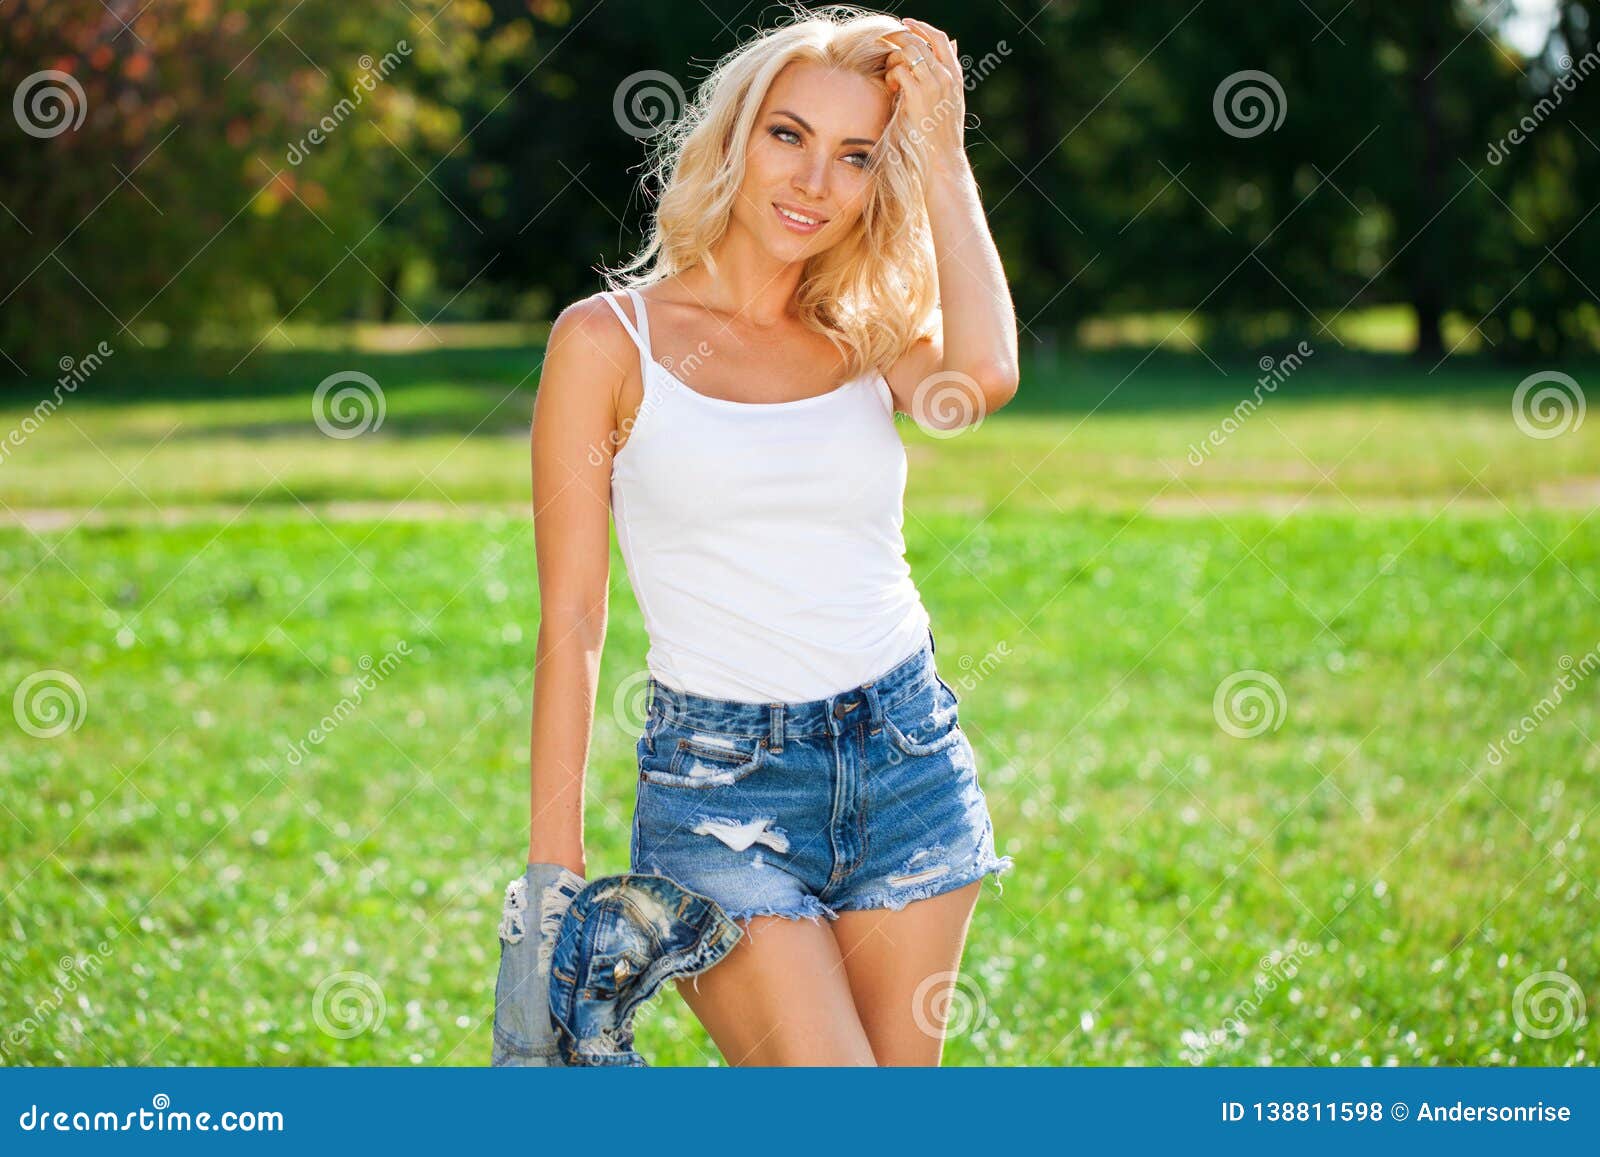 Beautiful Blonde Woman Dressed In A Denim Jacket And Shorts Stock Photo Image Of Caucasian